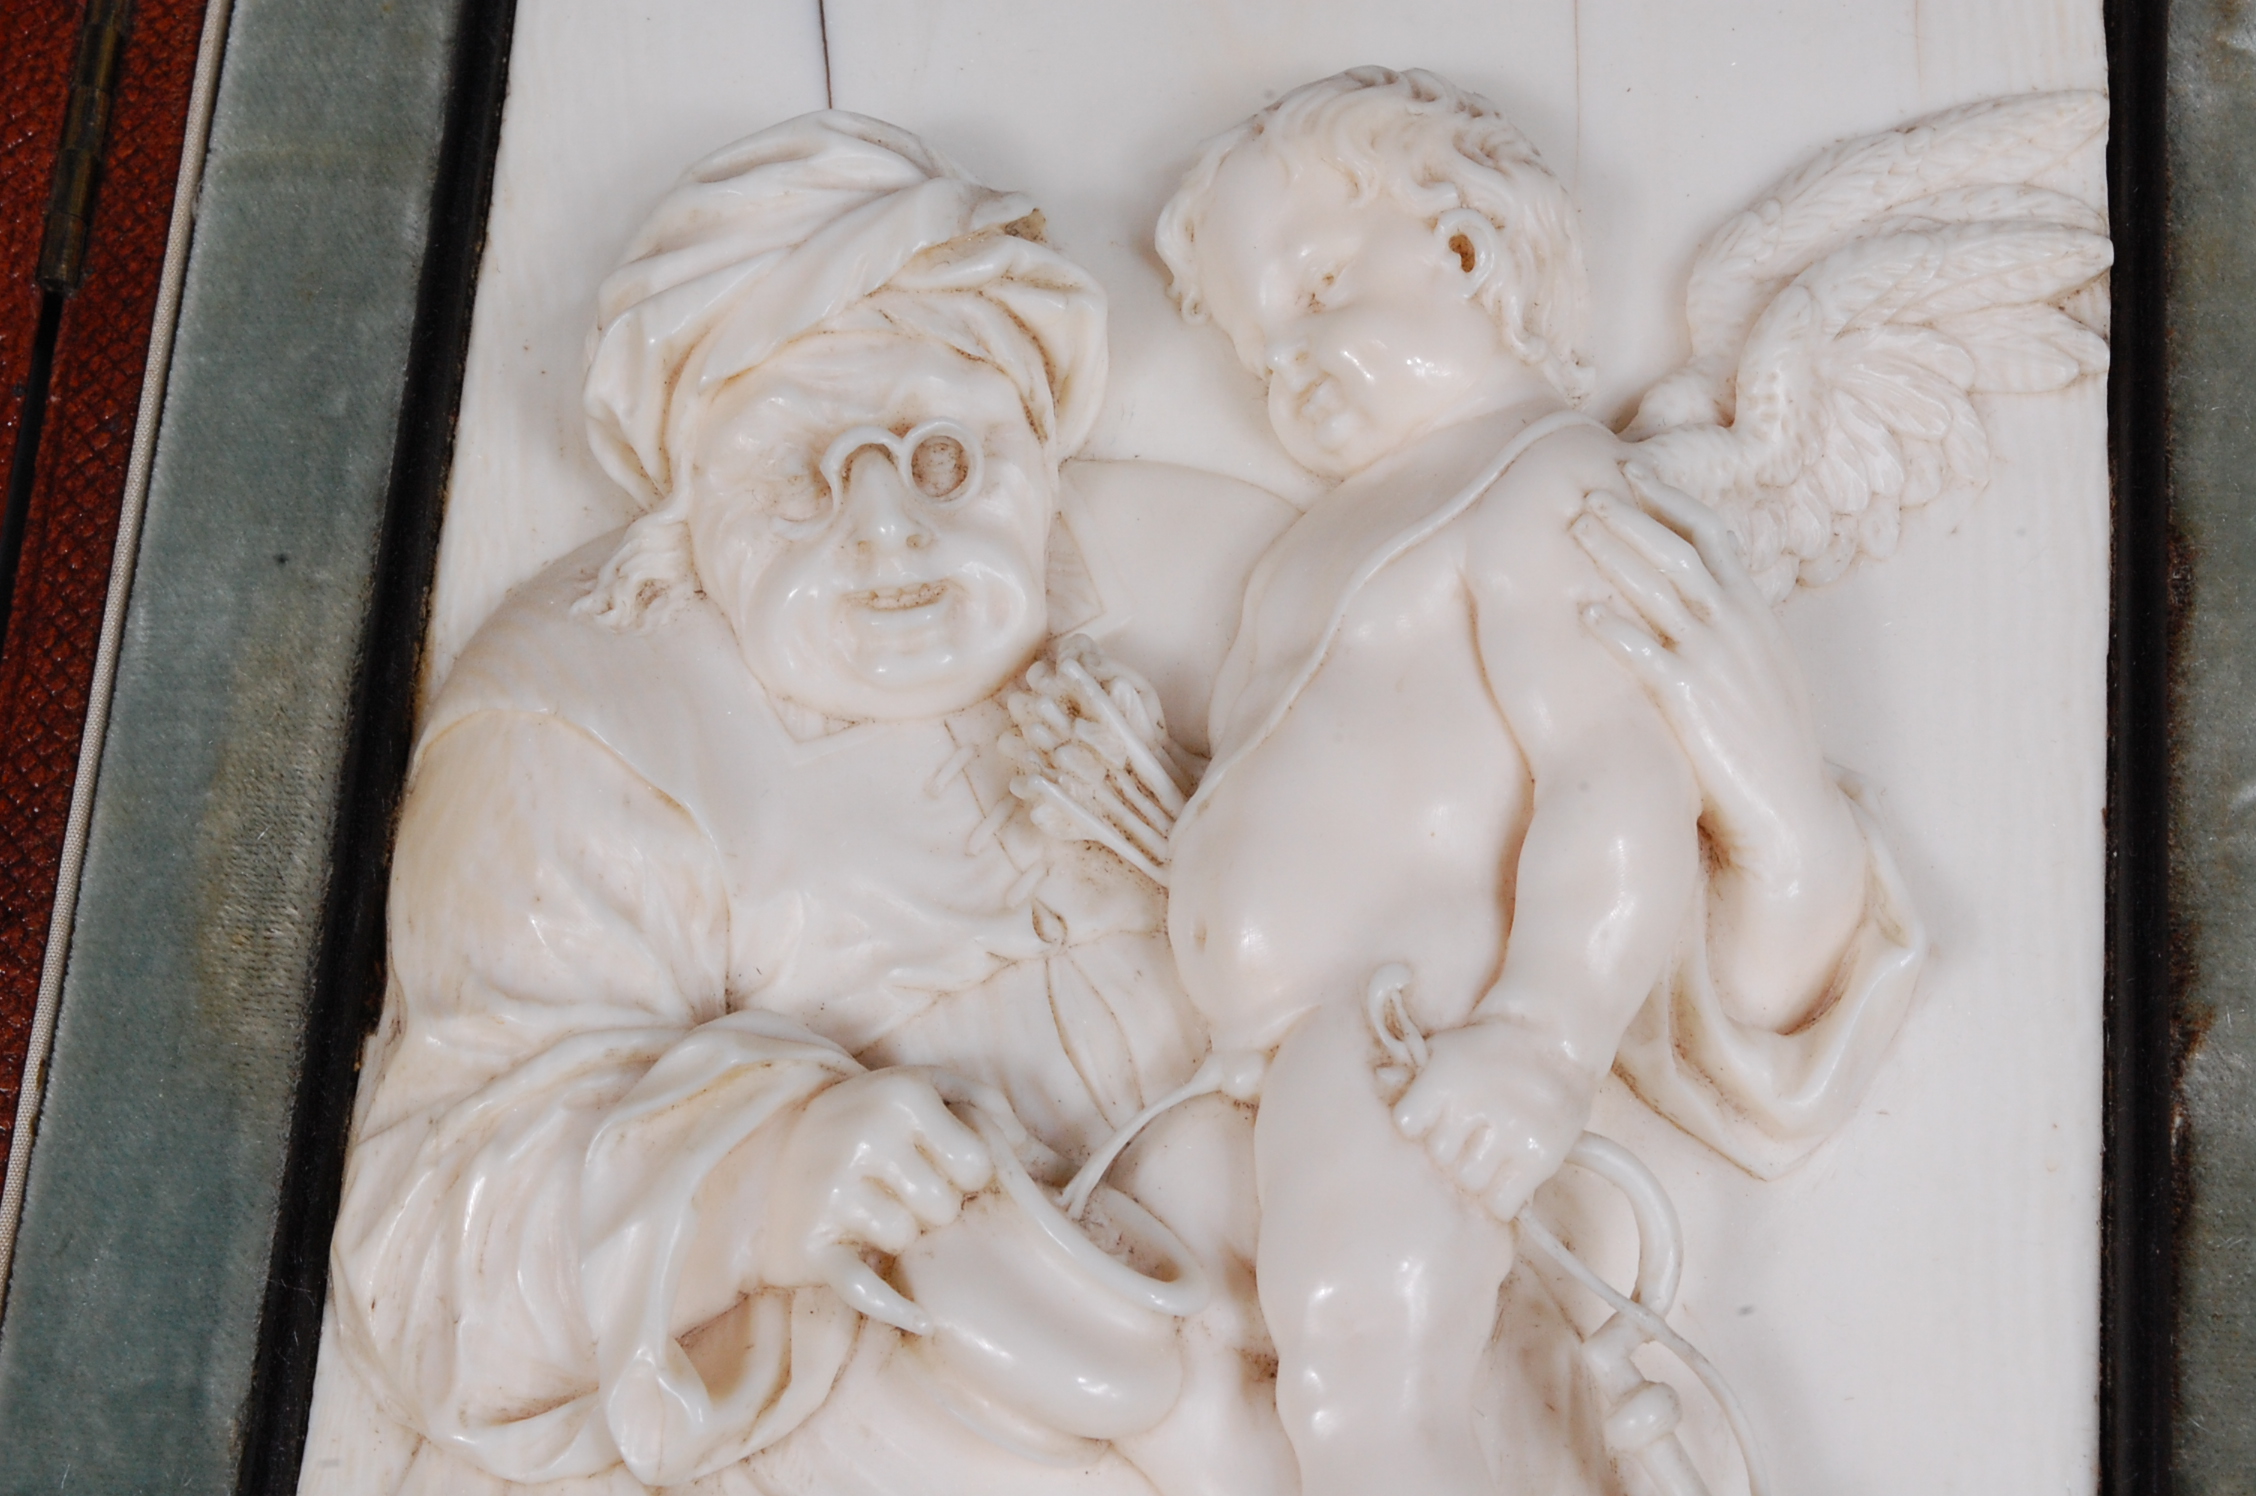 Attributed to Paul Heermann (1673-1732) - Cupid pissing, ivory relief carving, - Image 5 of 18